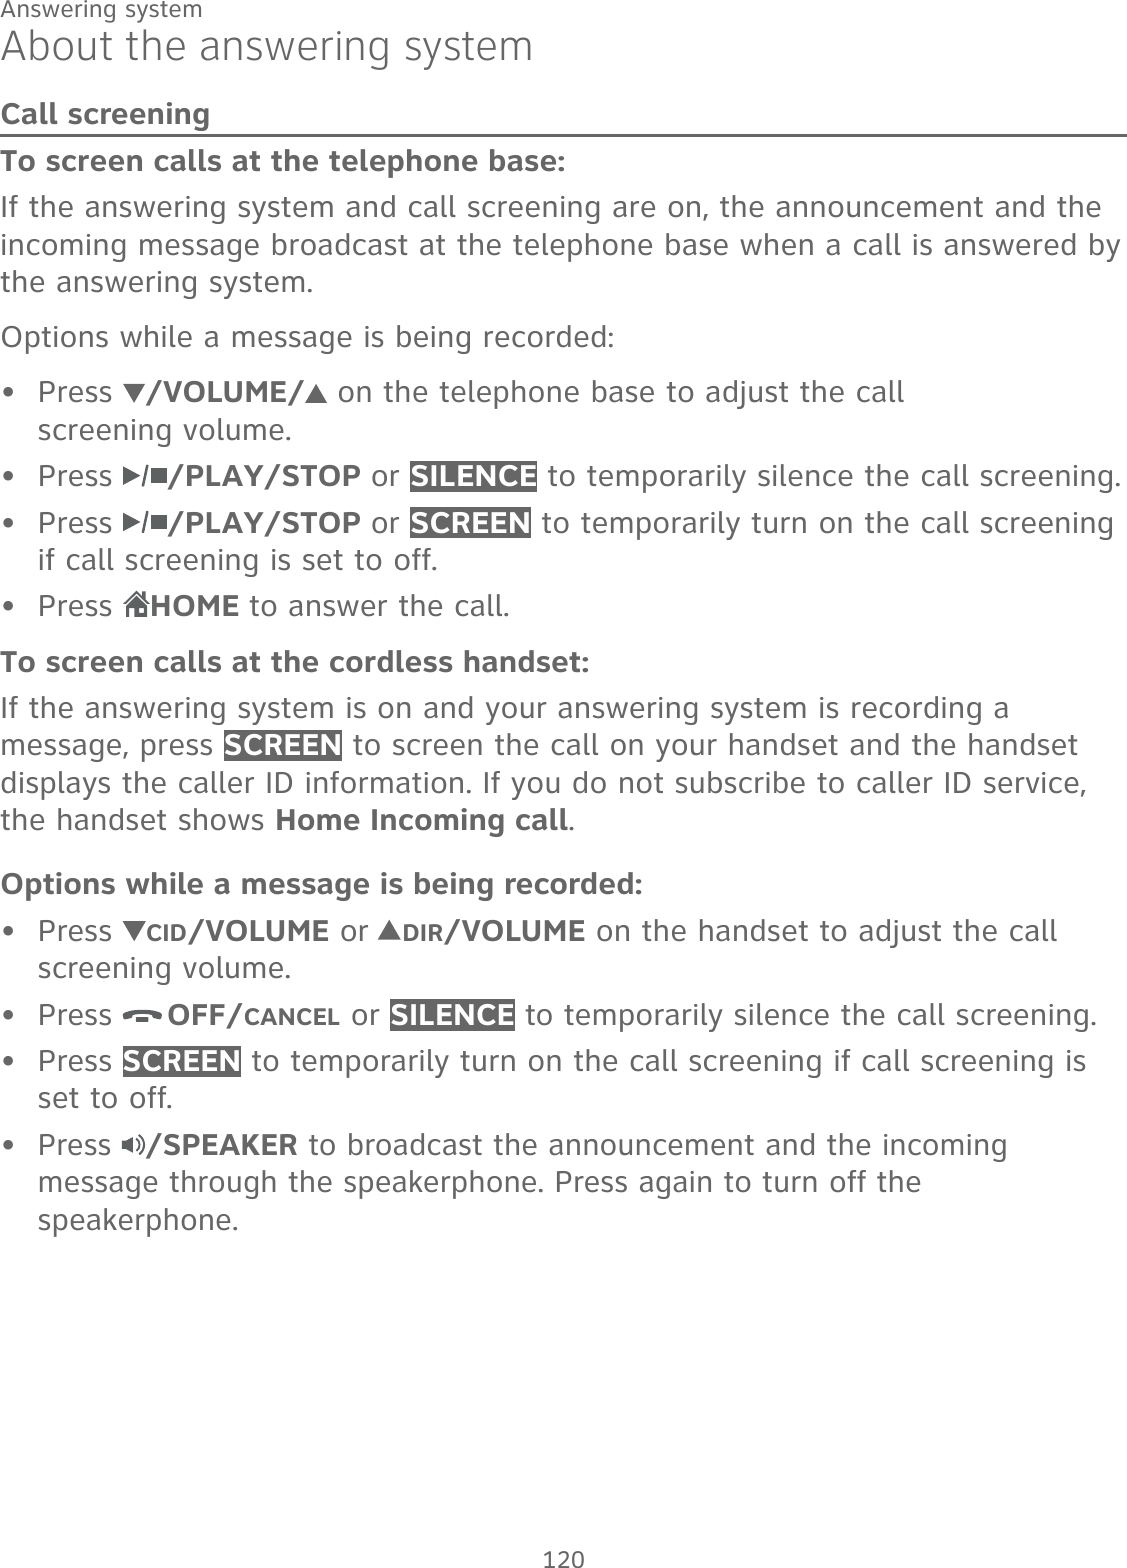 120Answering systemAbout the answering systemCall screeningTo screen calls at the telephone base:If the answering system and call screening are on, the announcement and the incoming message broadcast at the telephone base when a call is answered by the answering system.Options while a message is being recorded: Press  /VOLUME/  on the telephone base to adjust the call  screening volume.Press  /PLAY/STOP or SILENCE to temporarily silence the call screening. Press  /PLAY/STOP or SCREEN to temporarily turn on the call screening if call screening is set to off.Press HOME to answer the call.To screen calls at the cordless handset:If the answering system is on and your answering system is recording a message, press SCREEN to screen the call on your handset and the handset displays the caller ID information. If you do not subscribe to caller ID service, the handset shows Home Incoming call.Options while a message is being recorded:Press  CID/VOLUME or  DIR/VOLUME on the handset to adjust the call screening volume.Press  OFF/CANCEL or SILENCE to temporarily silence the call screening.Press SCREEN to temporarily turn on the call screening if call screening is set to off.Press  /SPEAKER to broadcast the announcement and the incoming message through the speakerphone. Press again to turn off the speakerphone.••••••••